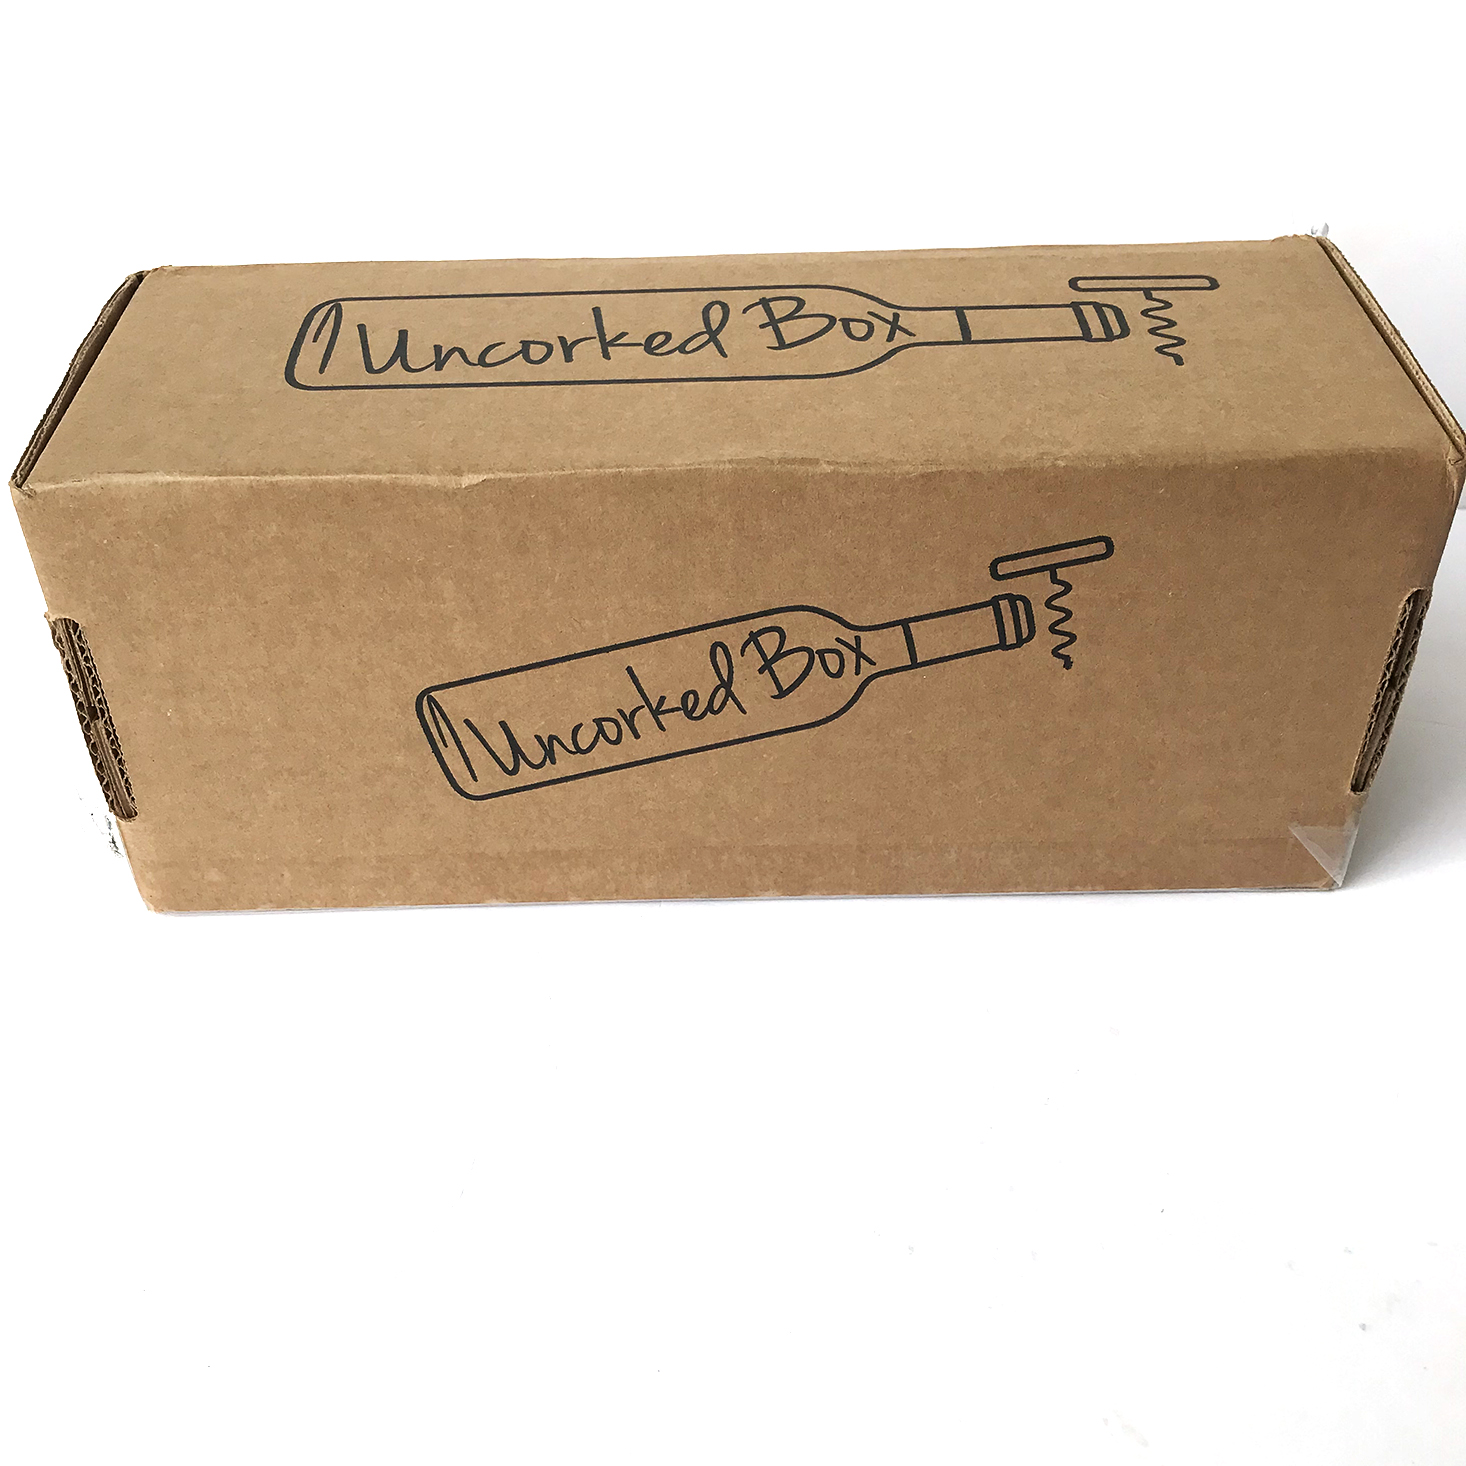 Uncorked Box Subscription Review + Coupon – May 2018